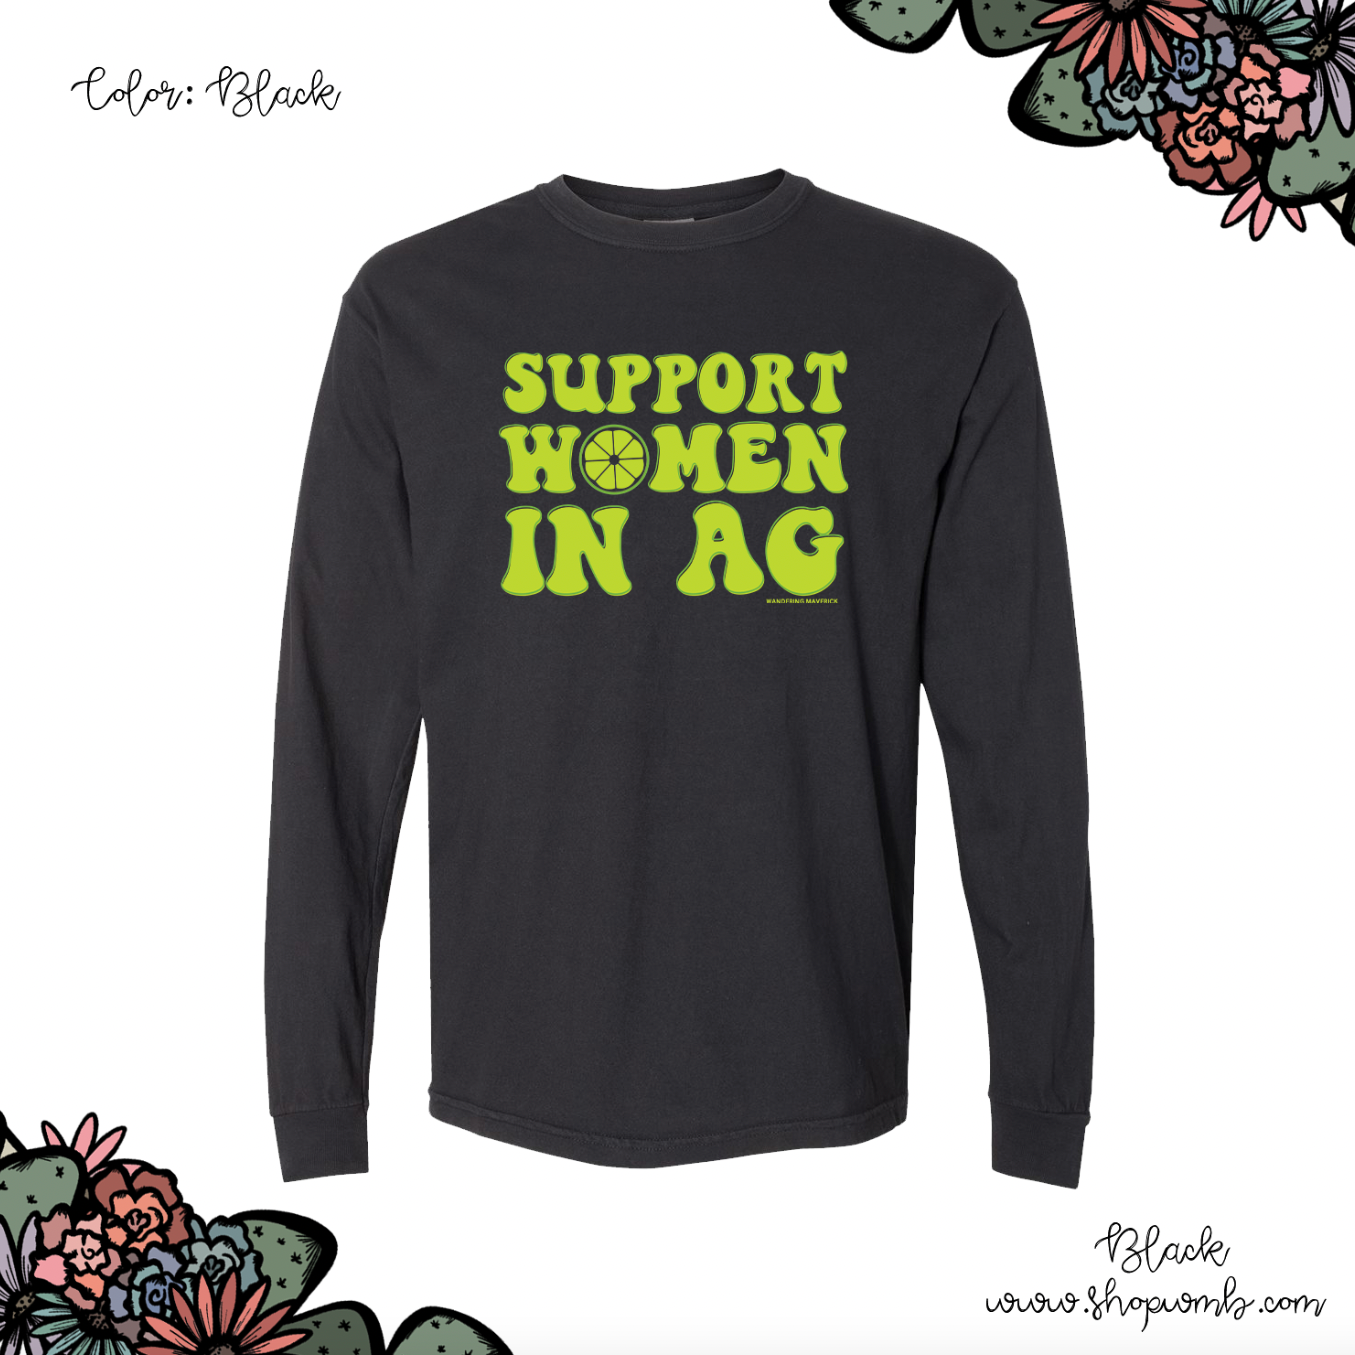 Lime Support Women In Ag LONG SLEEVE T-Shirt (S-3XL) - Multiple Colors!